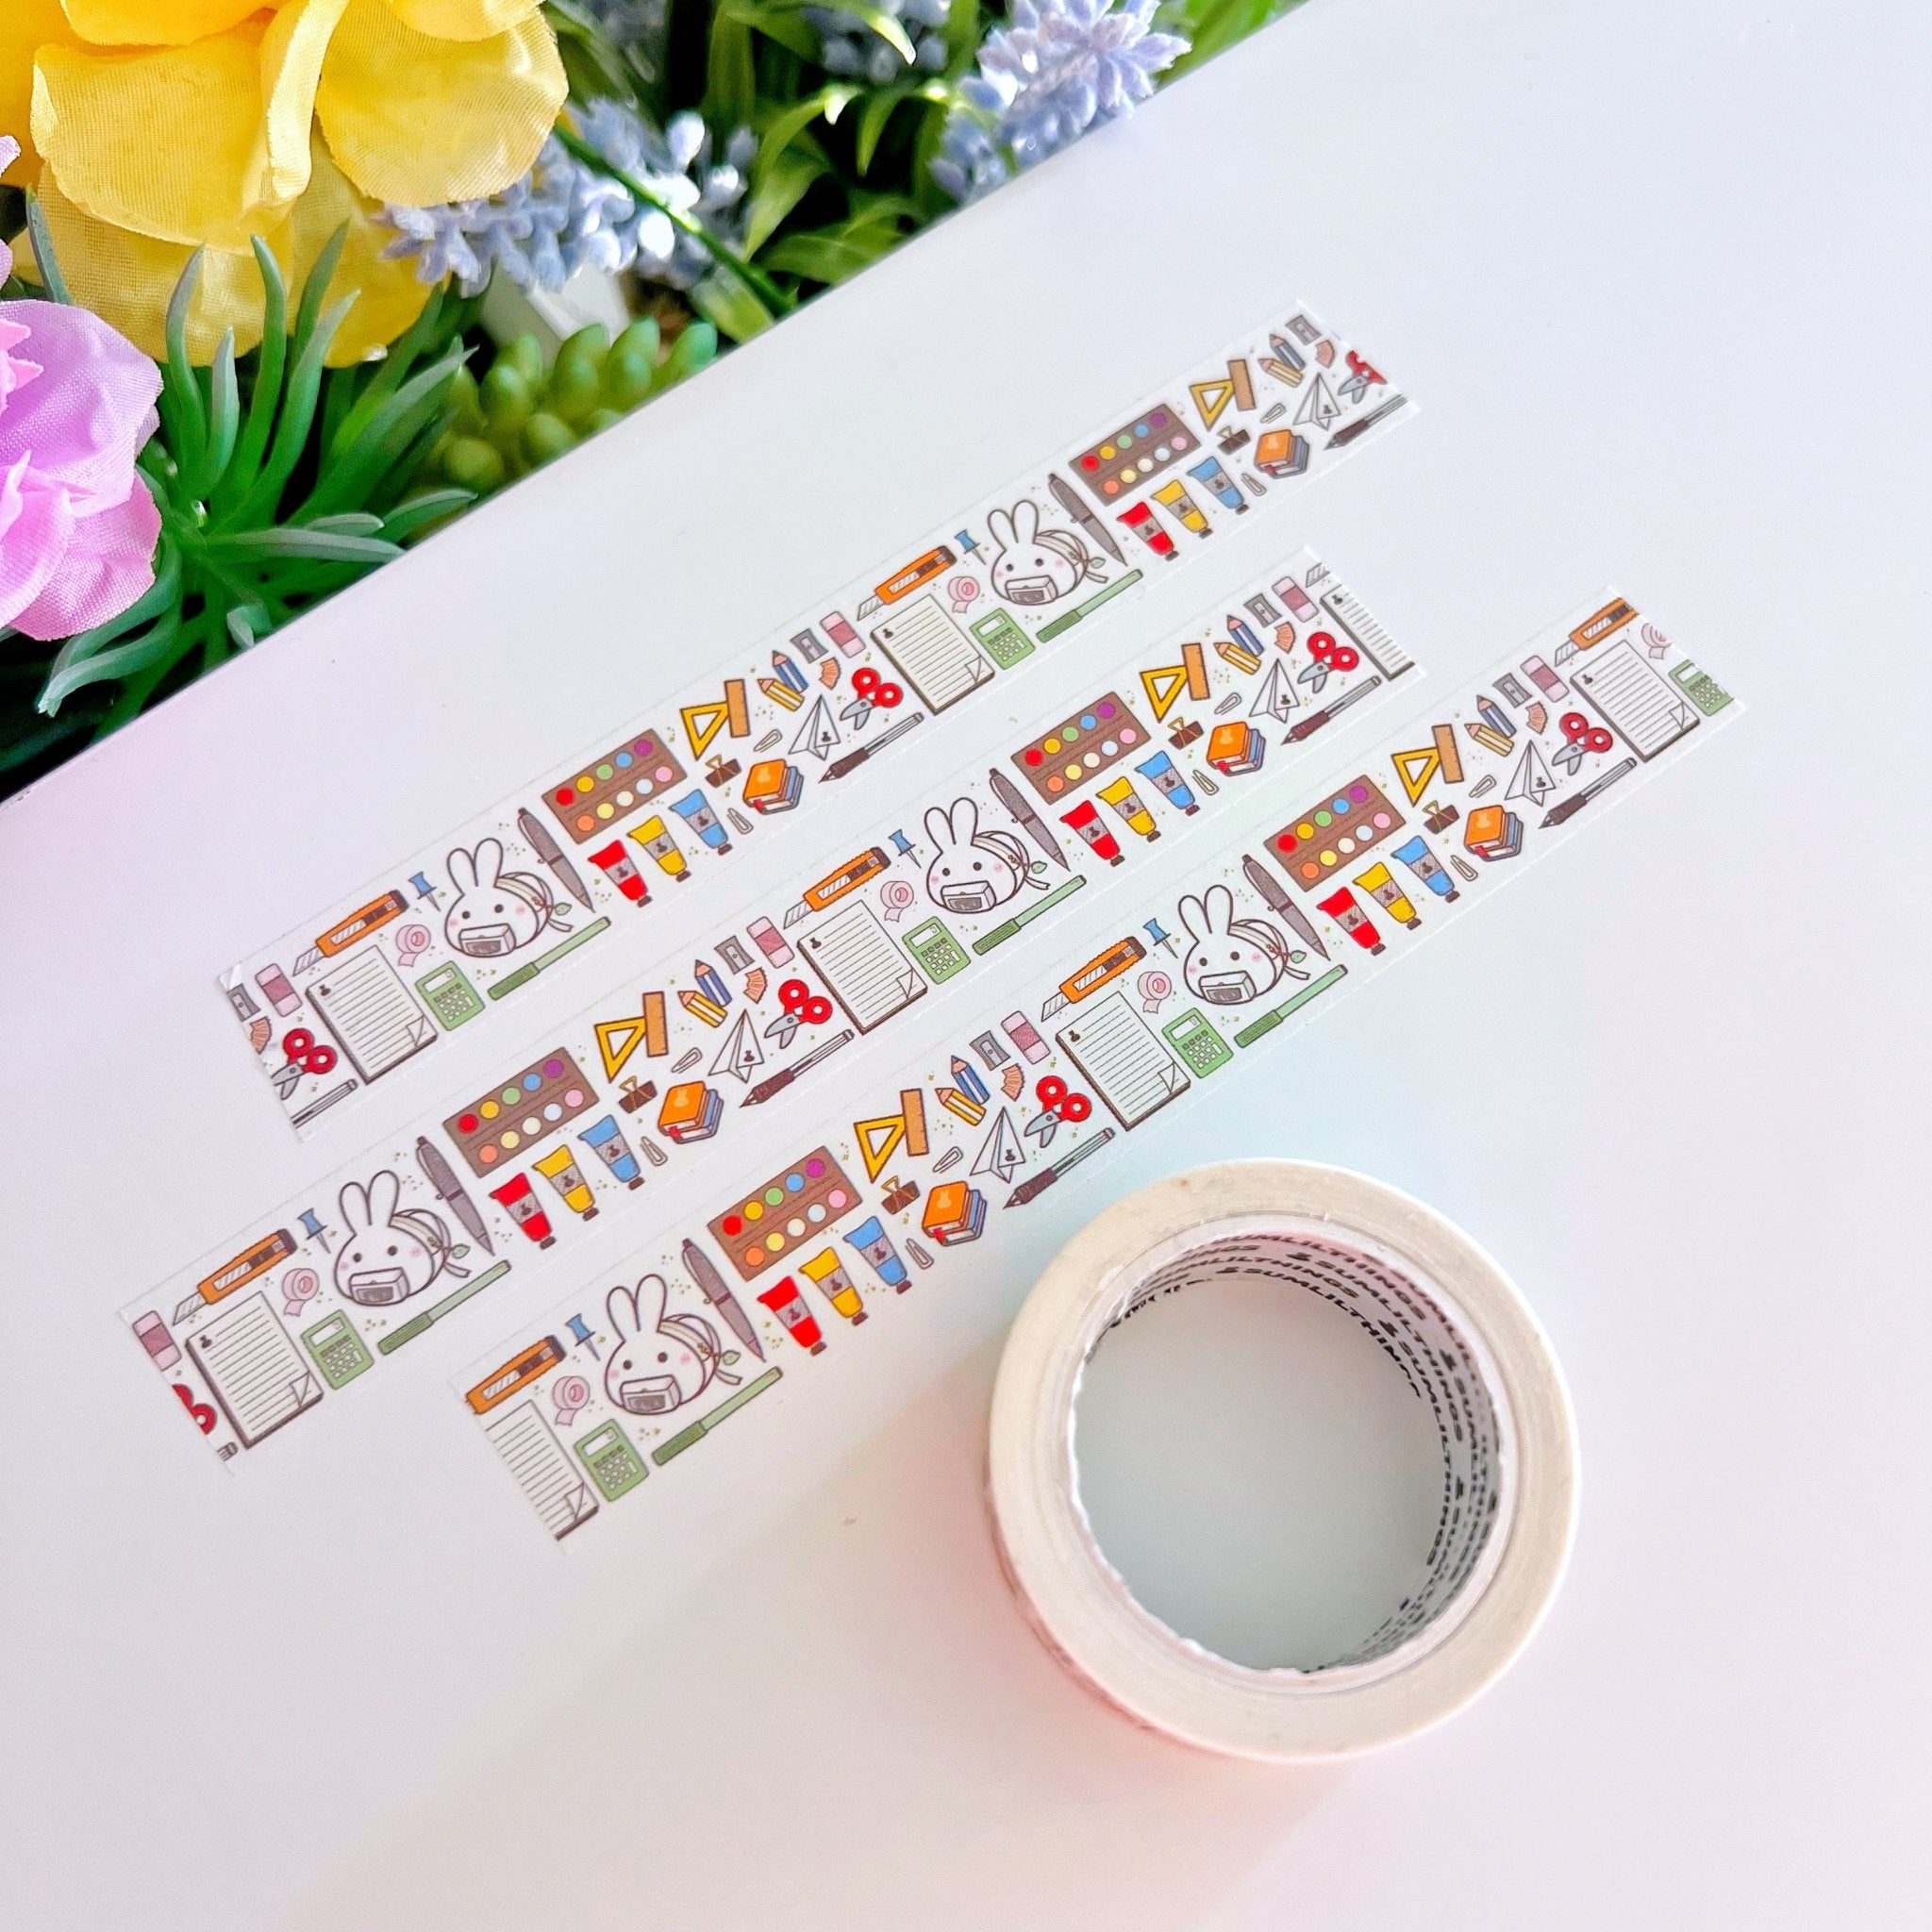 SLT Hobonichi WEEKS Sticker Subscription (Month-to-Month Plan) –  SumLilThings